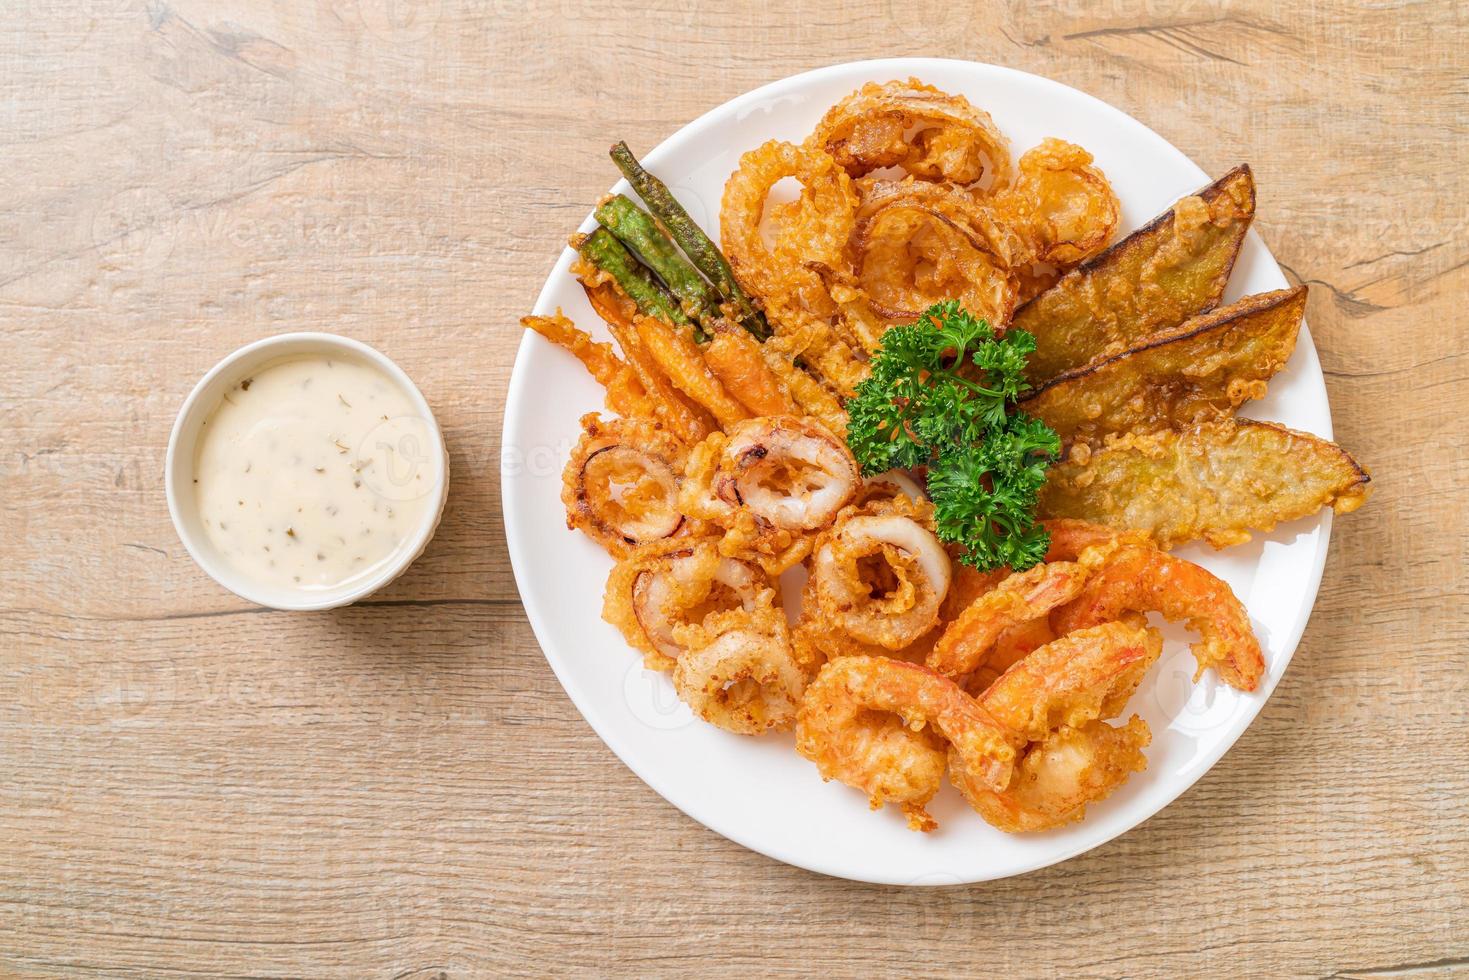 Deep-fried seafood of shrimp and squid with mix vegetables - unhealthy food style photo